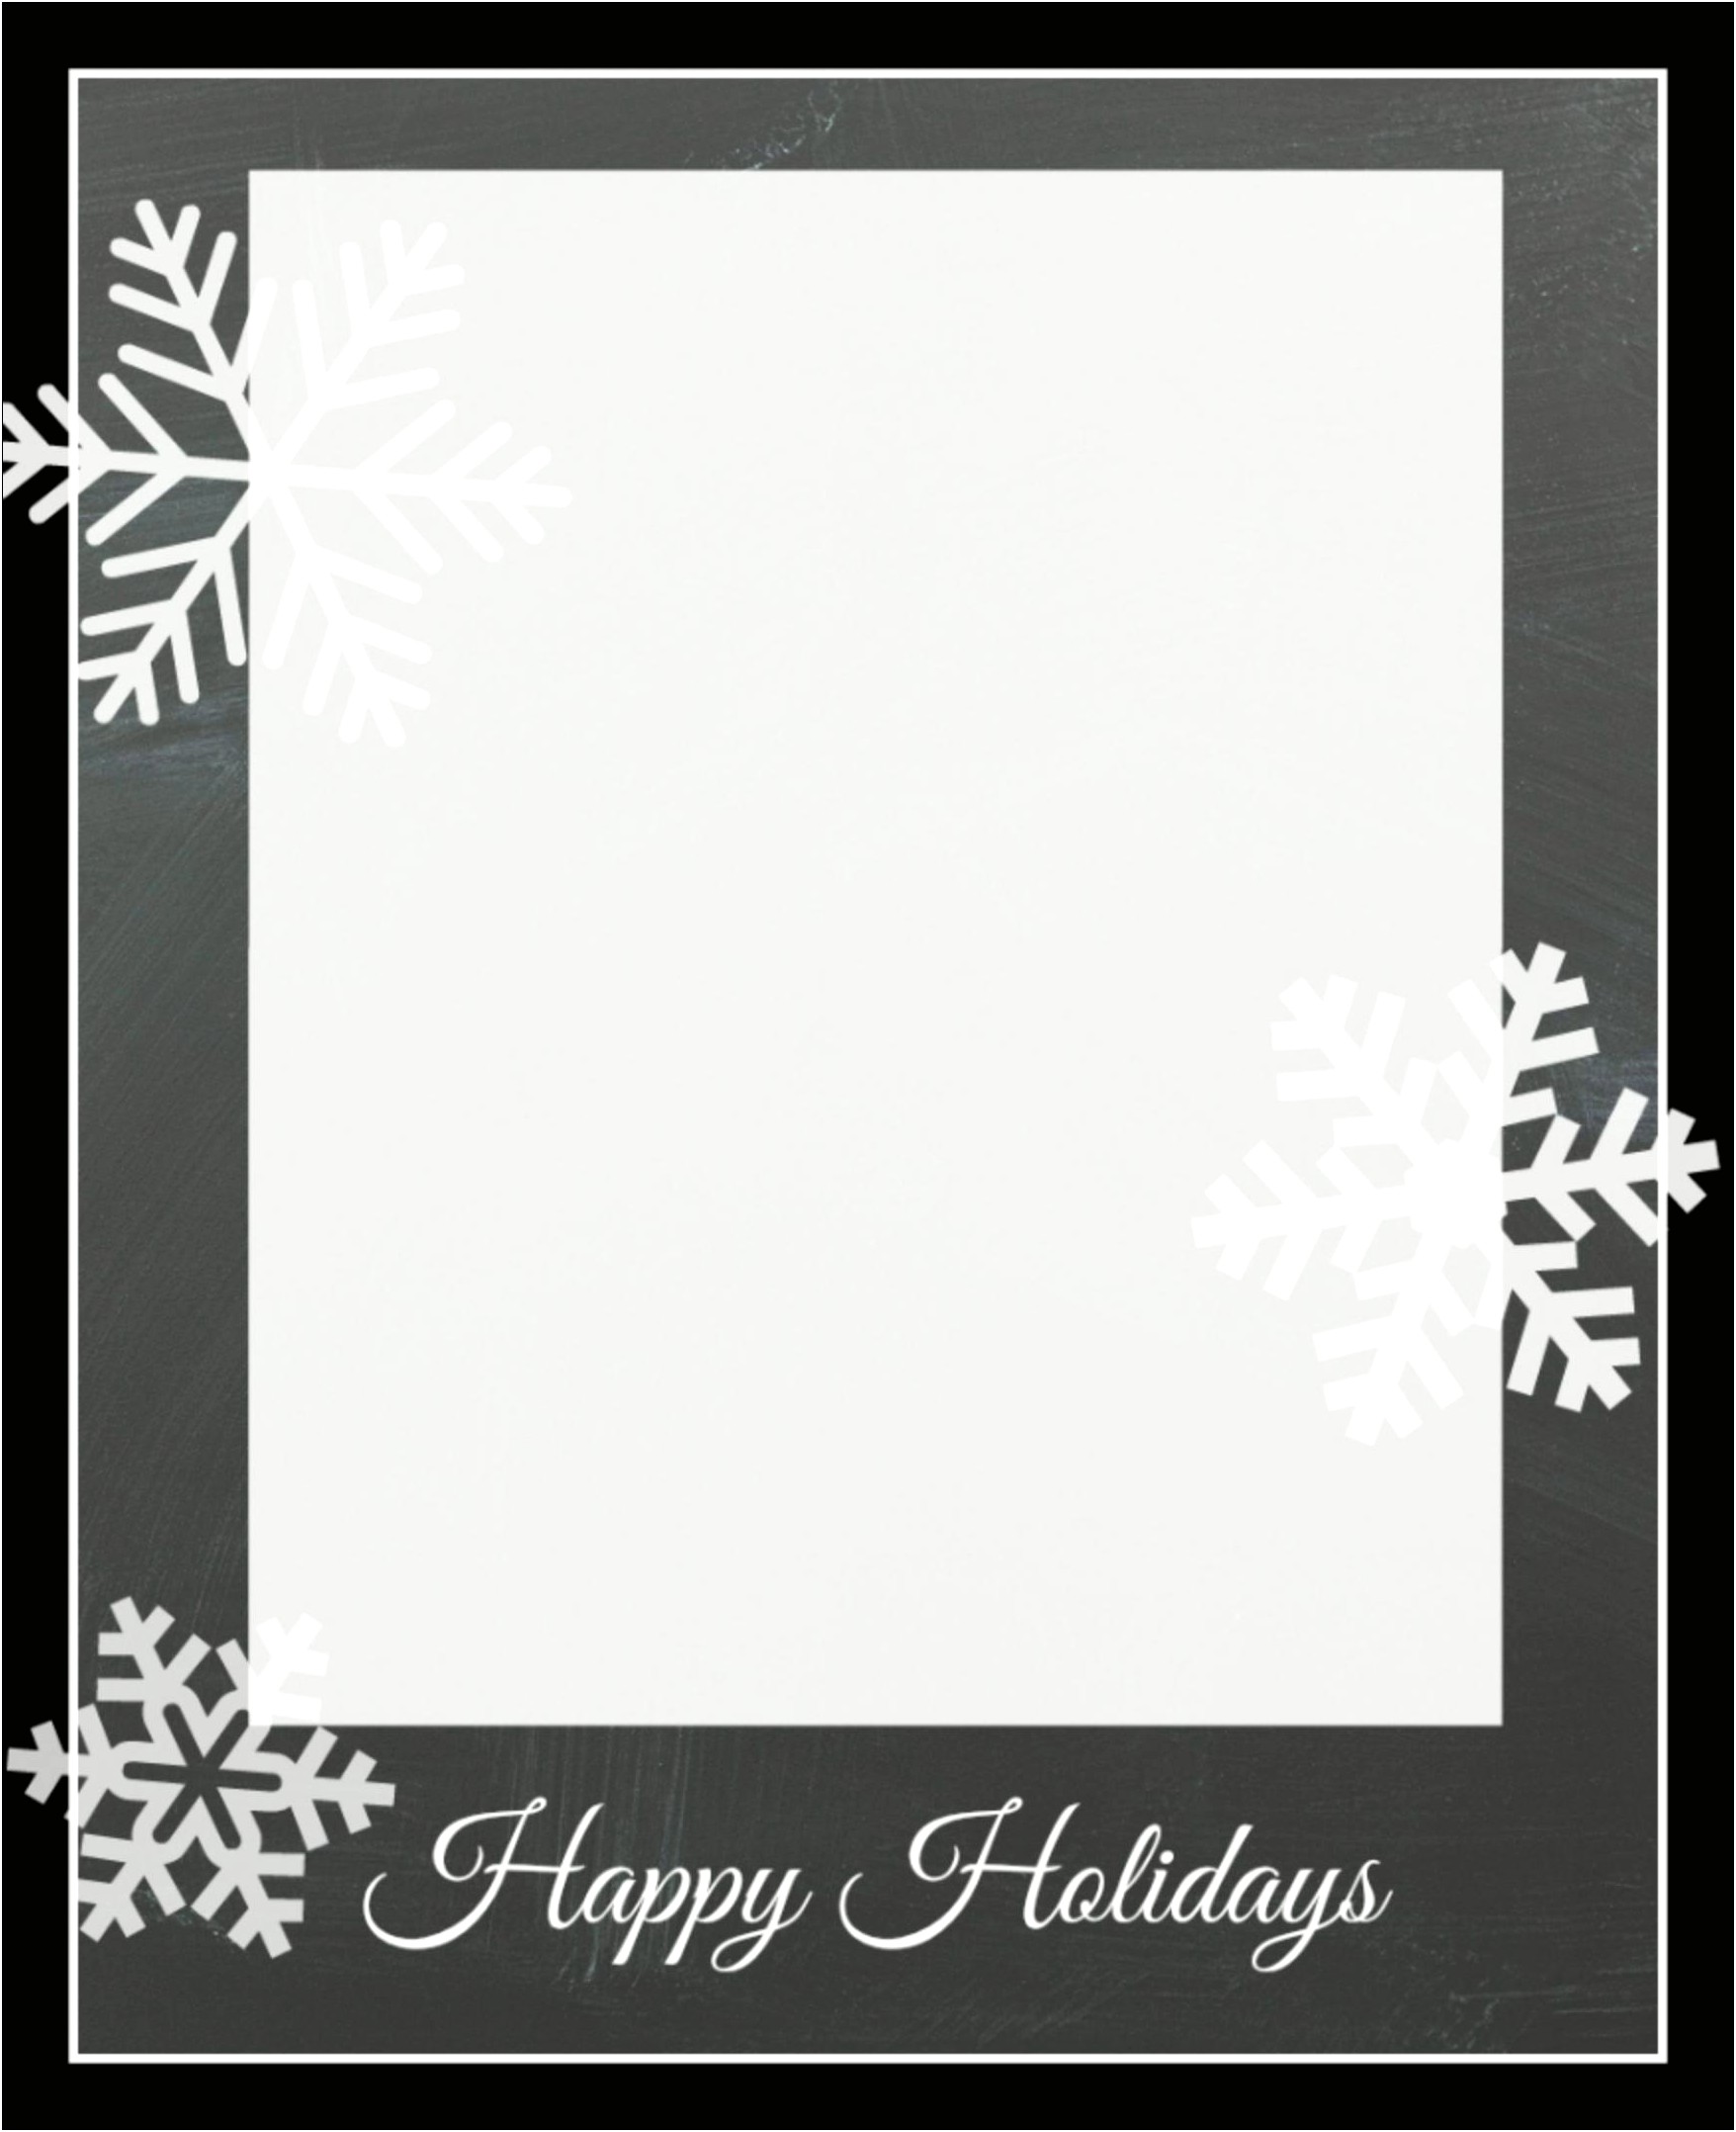 Free Christmas Card Templates For Photographers Be Merry